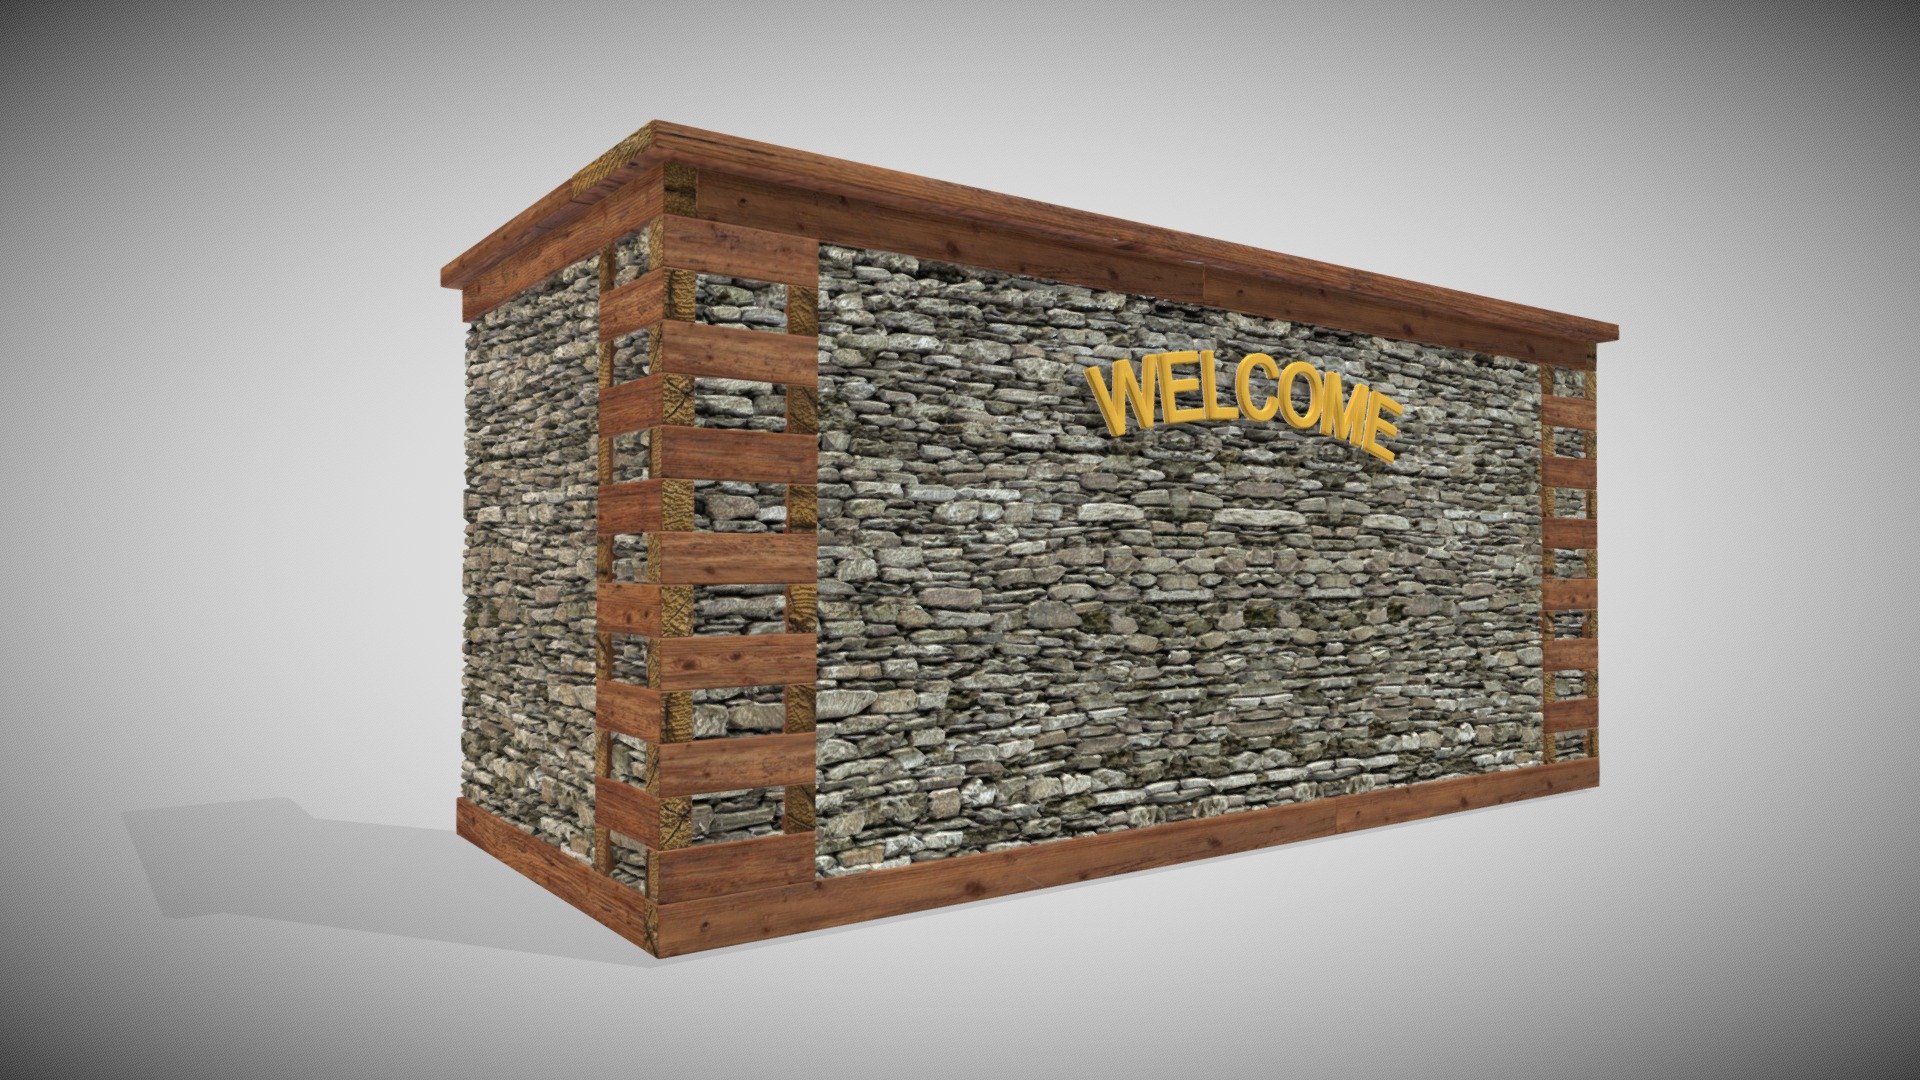 Himalayan Style Reception Desk

One Material 4k Metalness

Ids Map and VRay Material attached - Reception Desk Rocciolo - Buy Royalty Free 3D model by Francesco Coldesina (@topfrank2013) 3d model